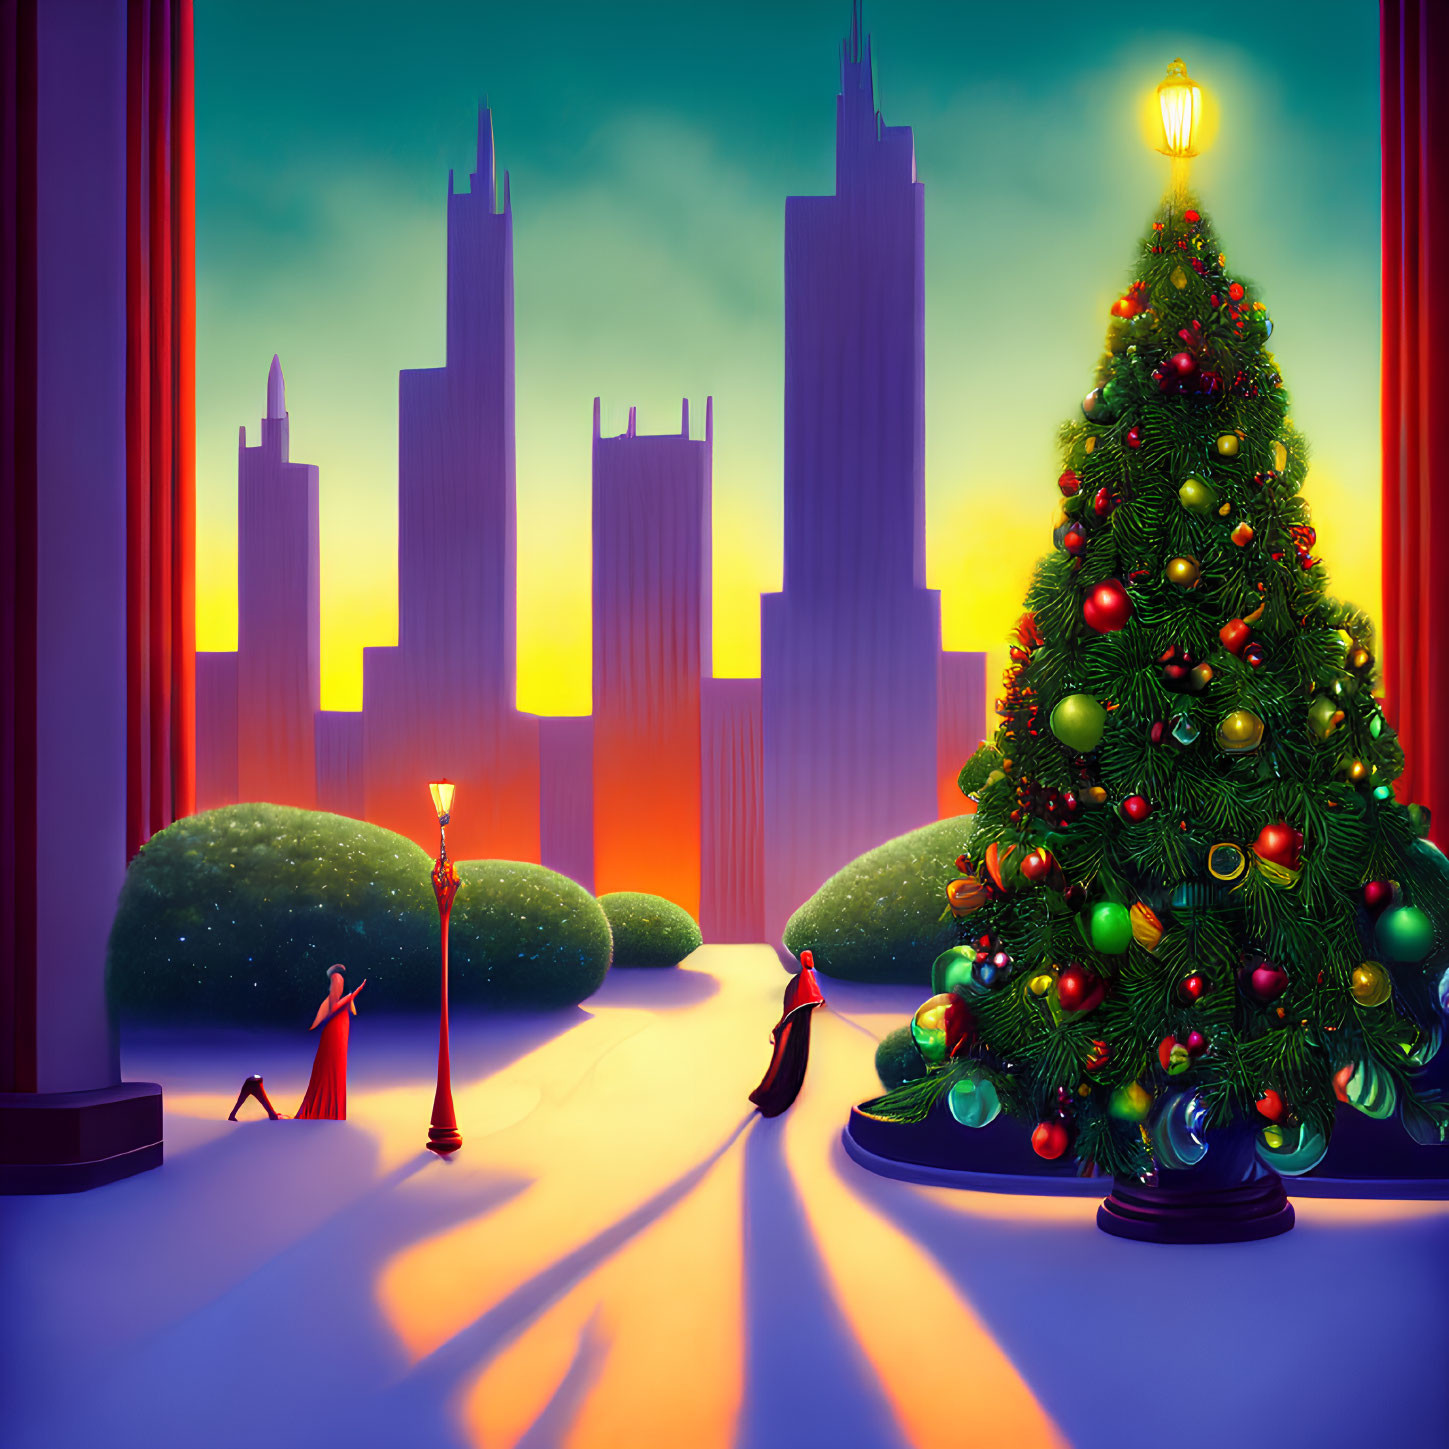 Colorful Christmas tree with penguins and city skyline backdrop